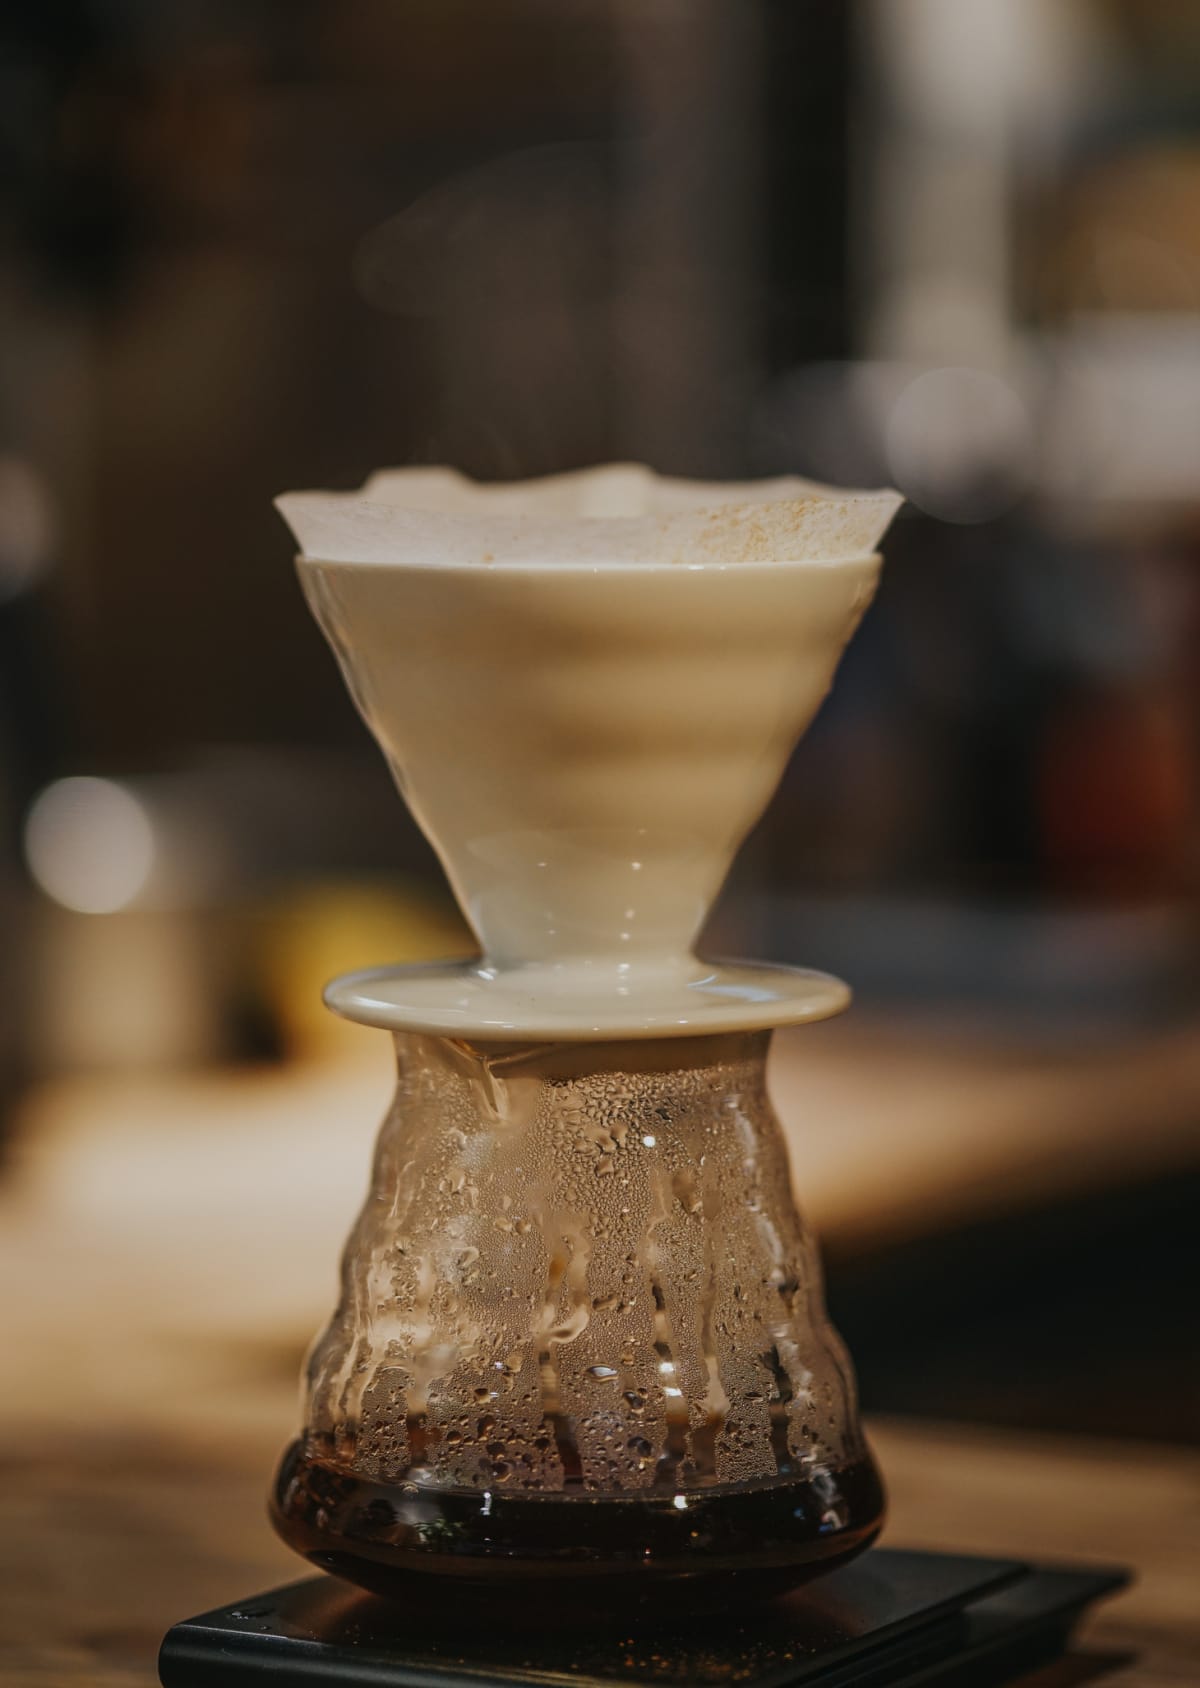 To make coffee with the Hario V60, pouring the measured coffee into the hopper